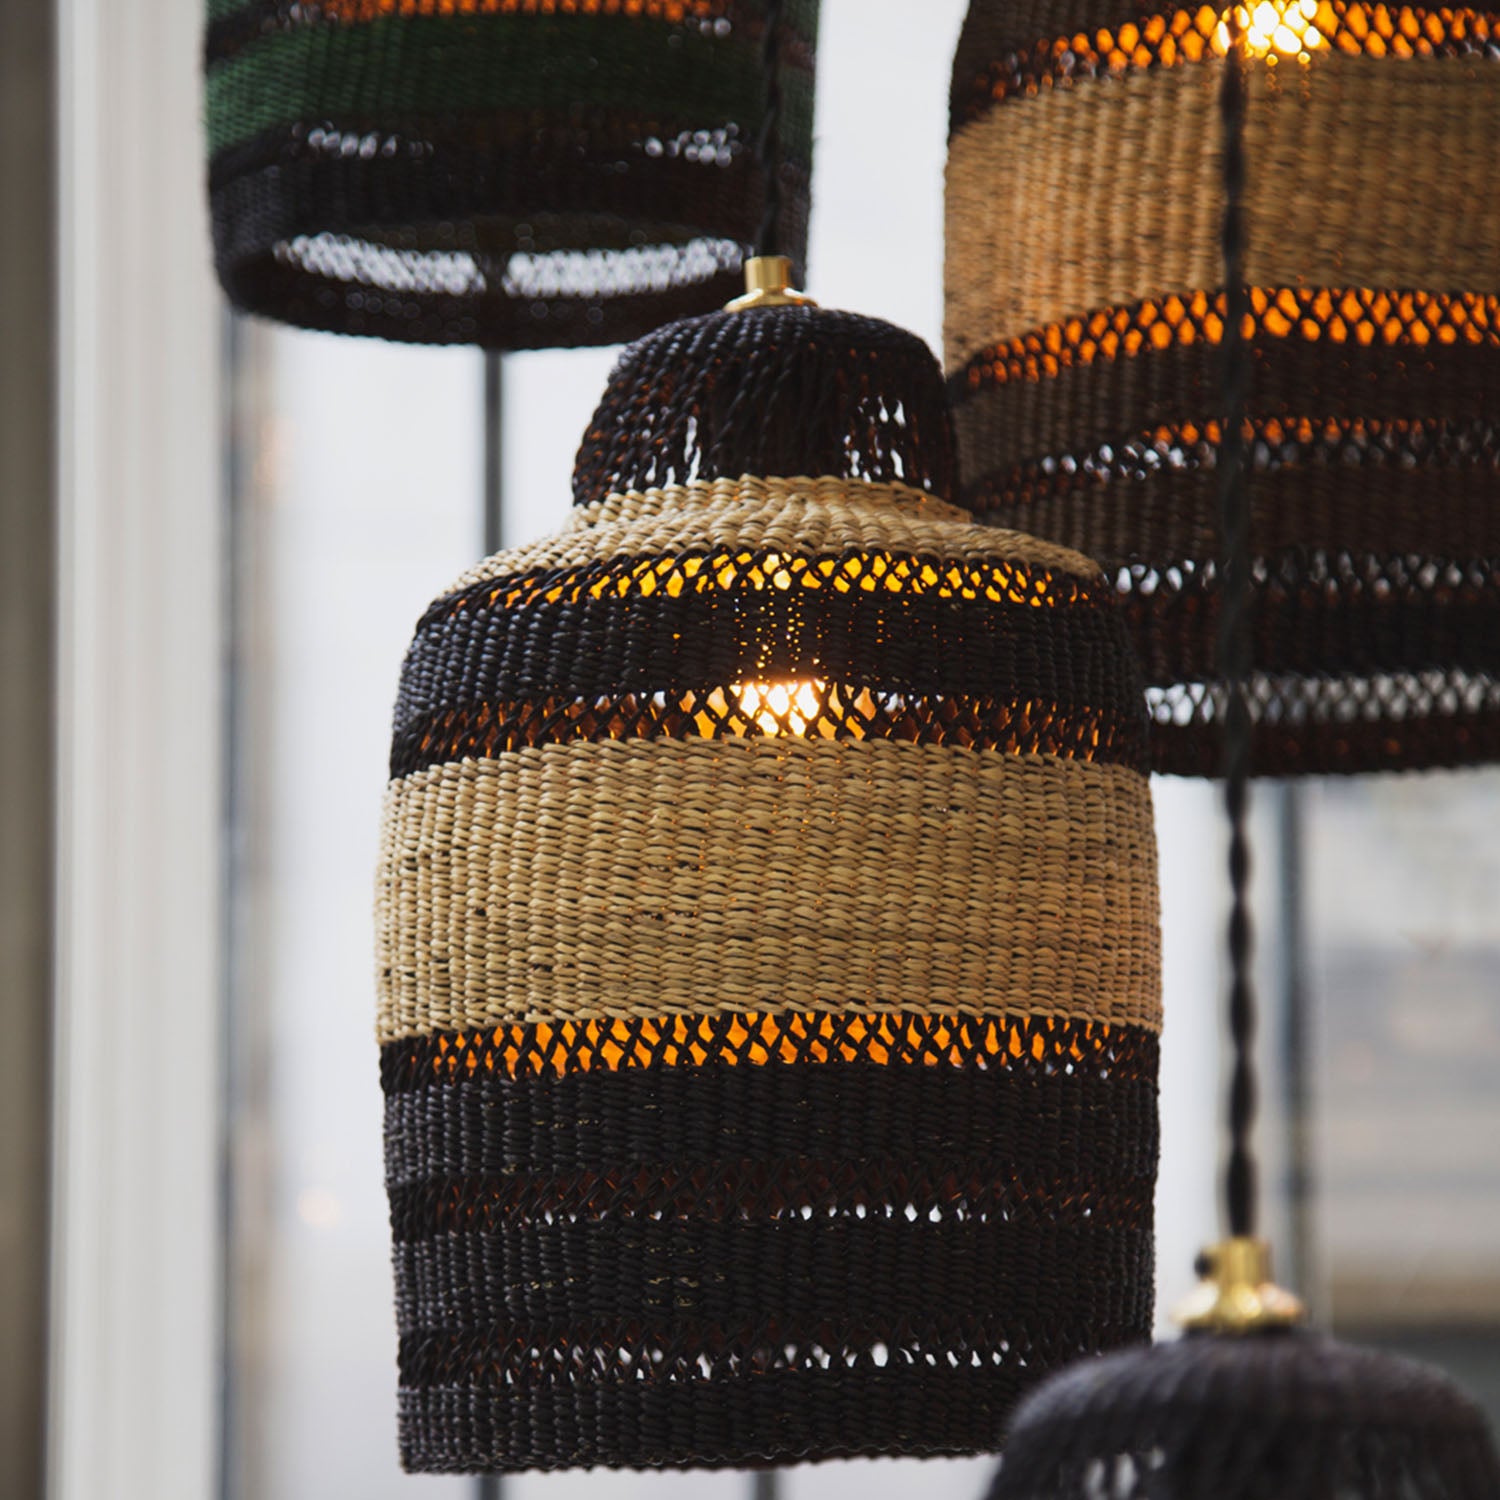 Multiple pendant lights made from woven materials create an inviting atmosphere.